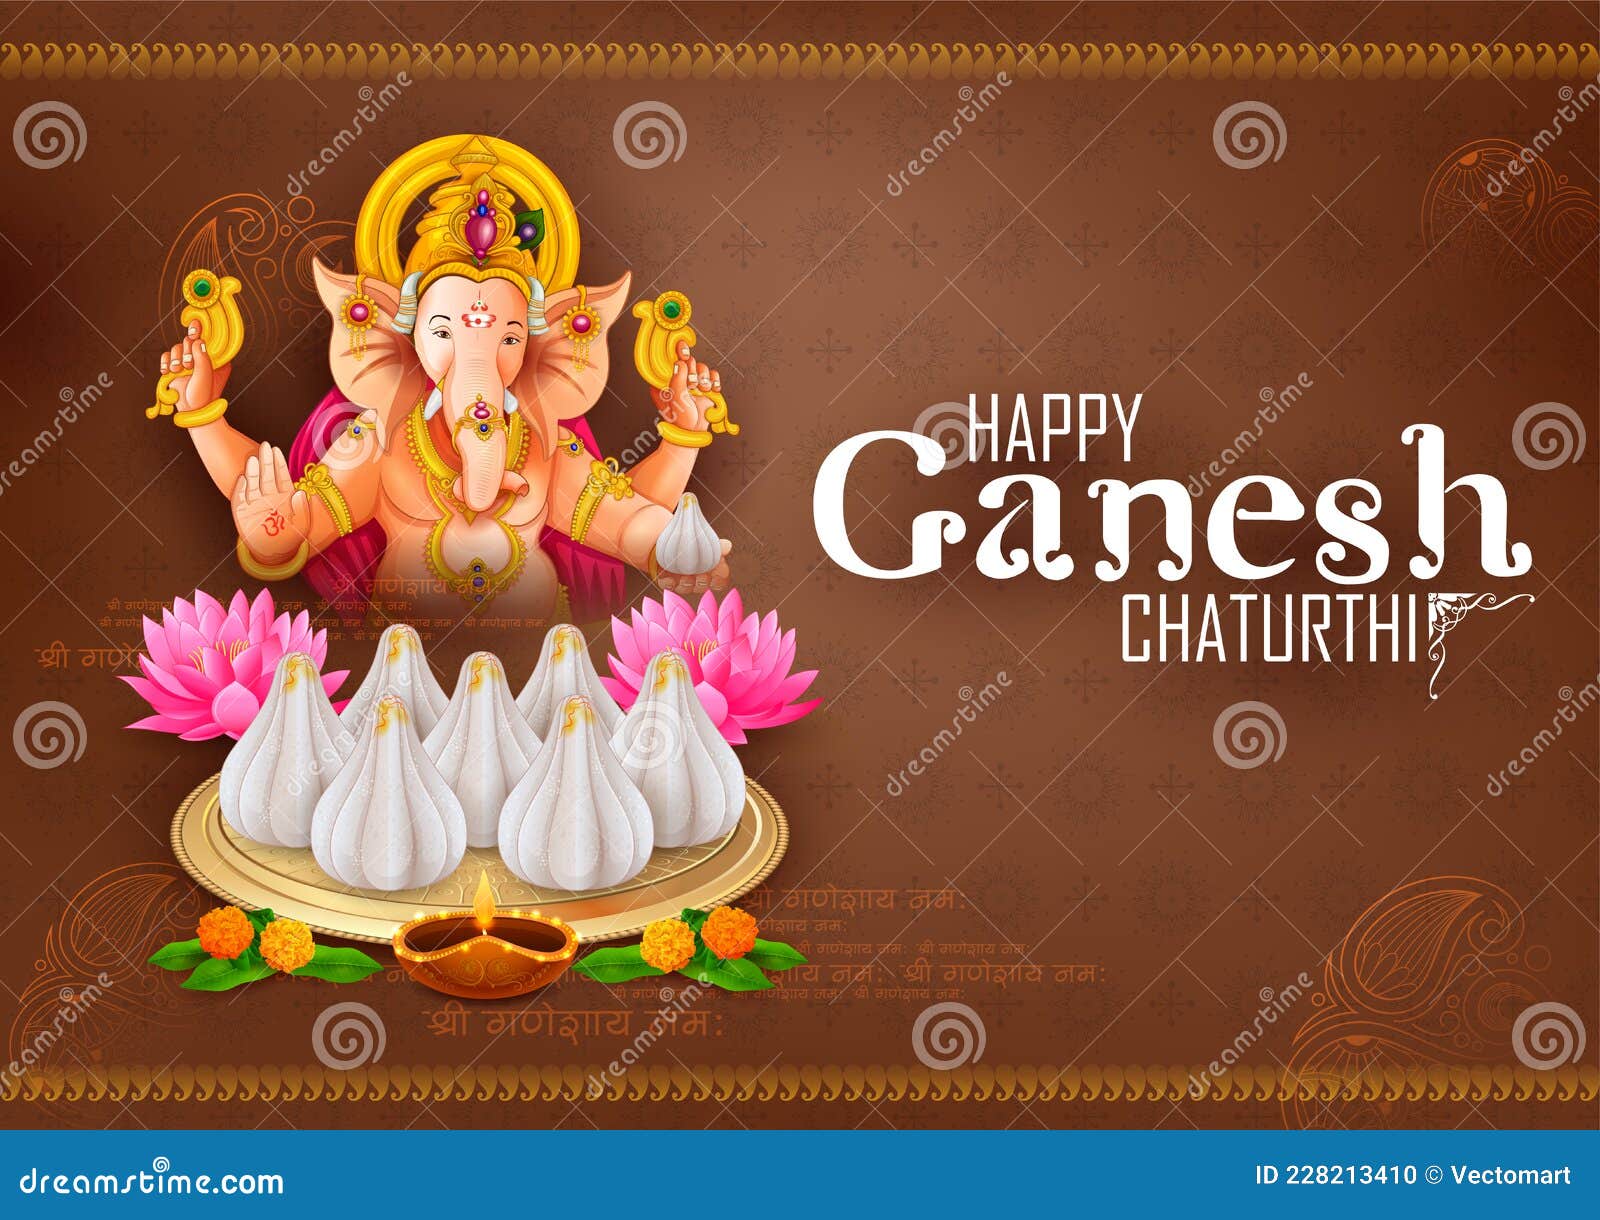 Lord Ganpati Background for Ganesh Chaturthi Festival of India with ...